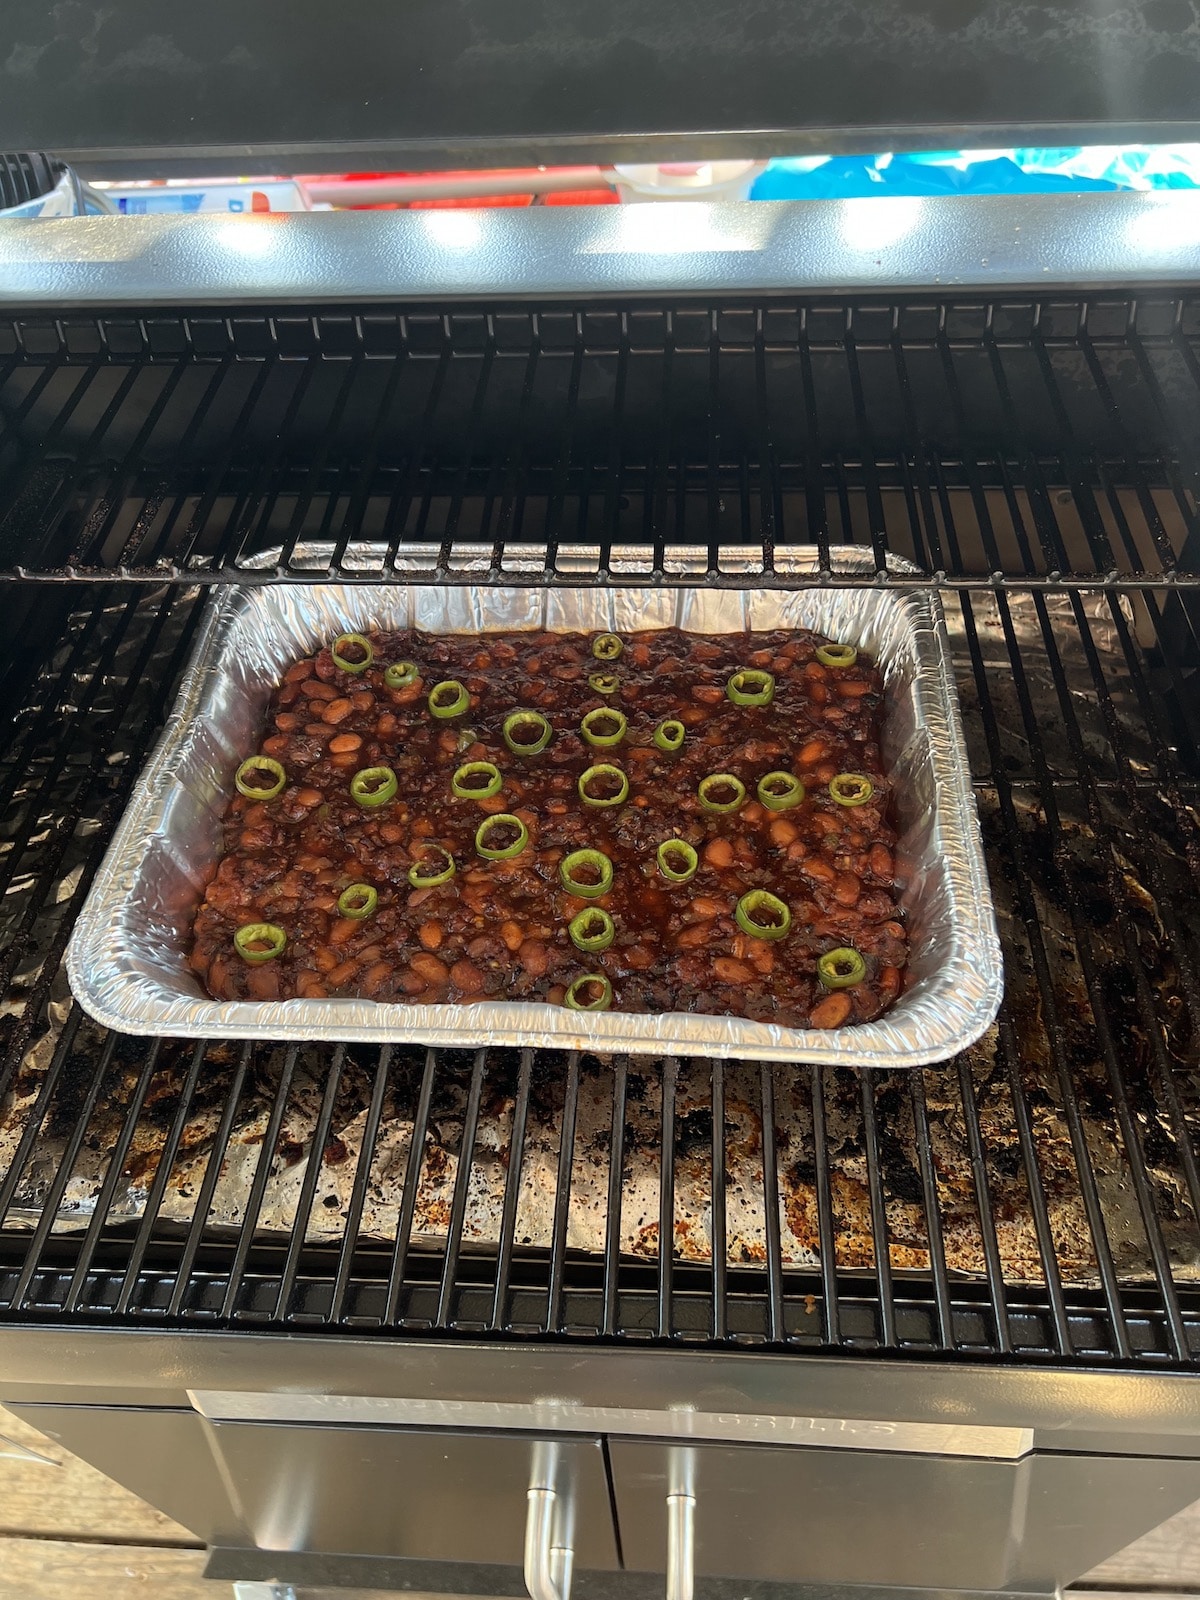 Cowboy beans cooking on grill.